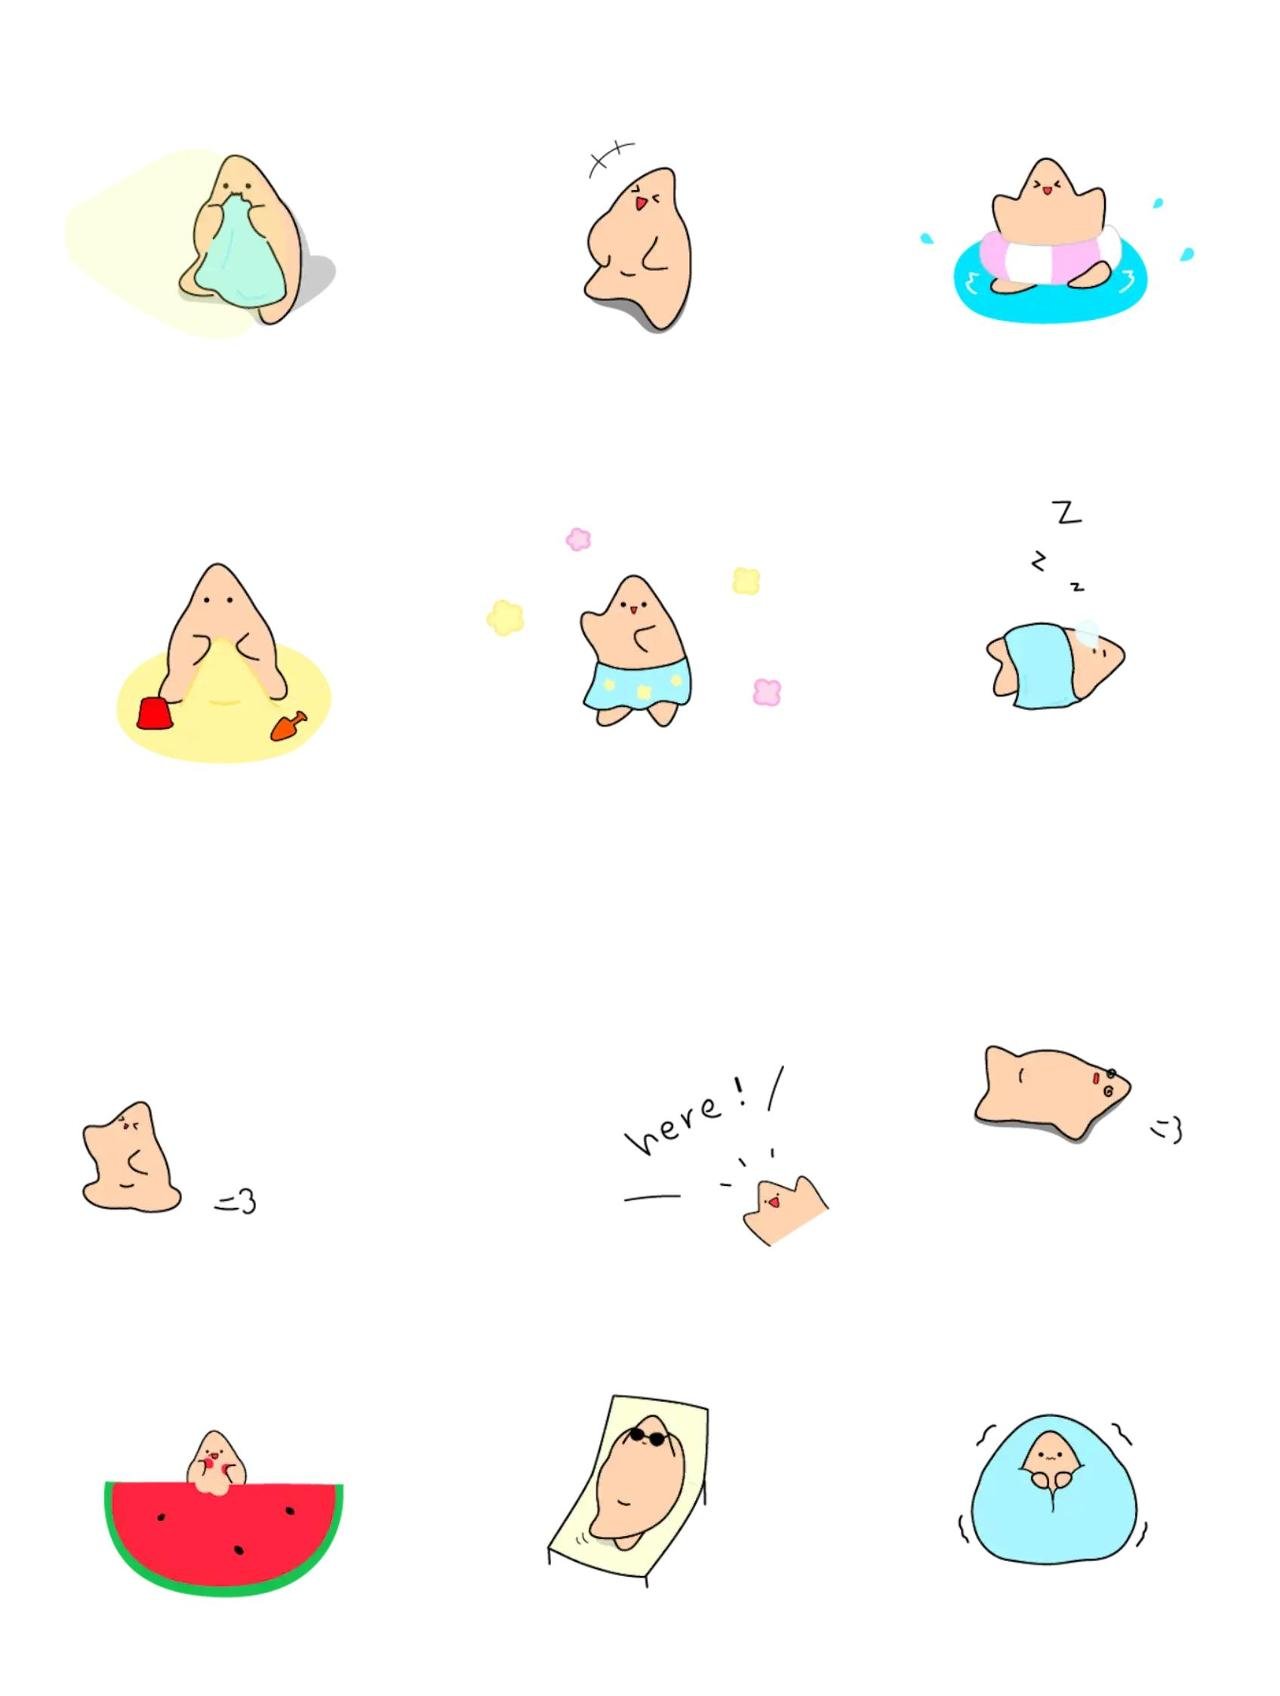 Mini mini starfish Animals,Etc. sticker pack for Whatsapp, Telegram, Signal, and others chatting and message apps